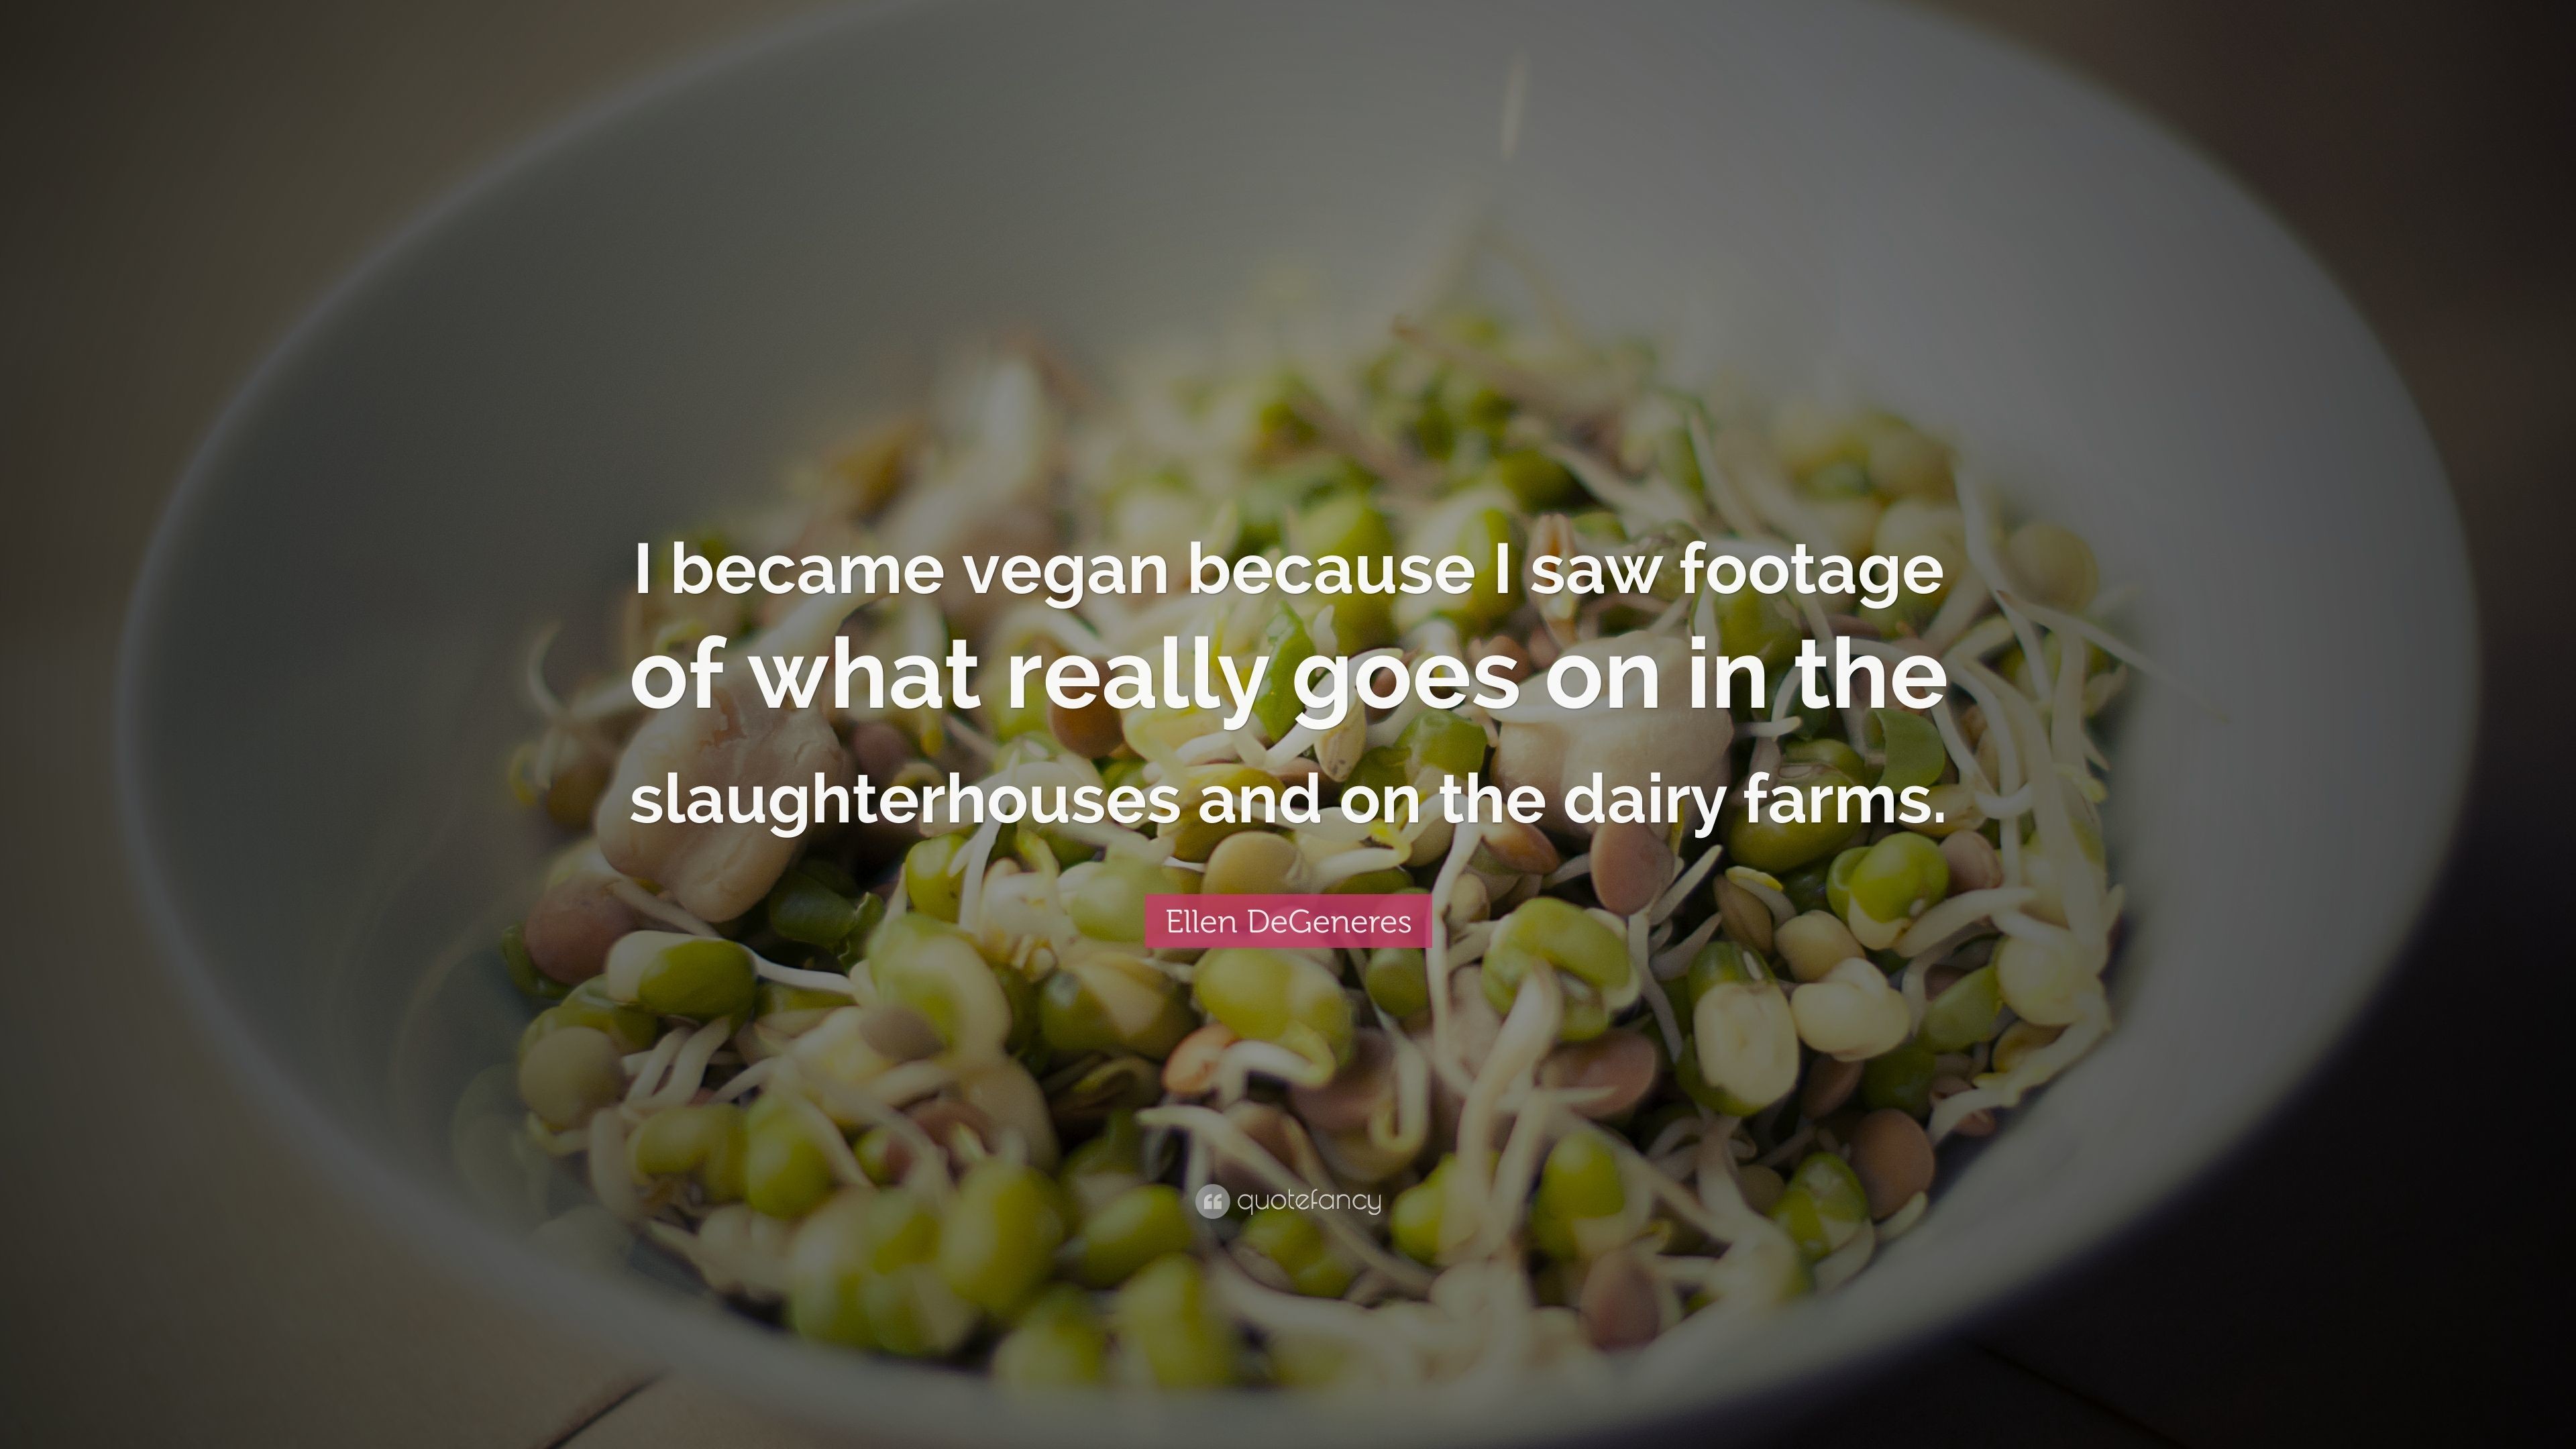 3840x2160 Ellen DeGeneres Quote: “I became vegan because I saw footage of what really  goes